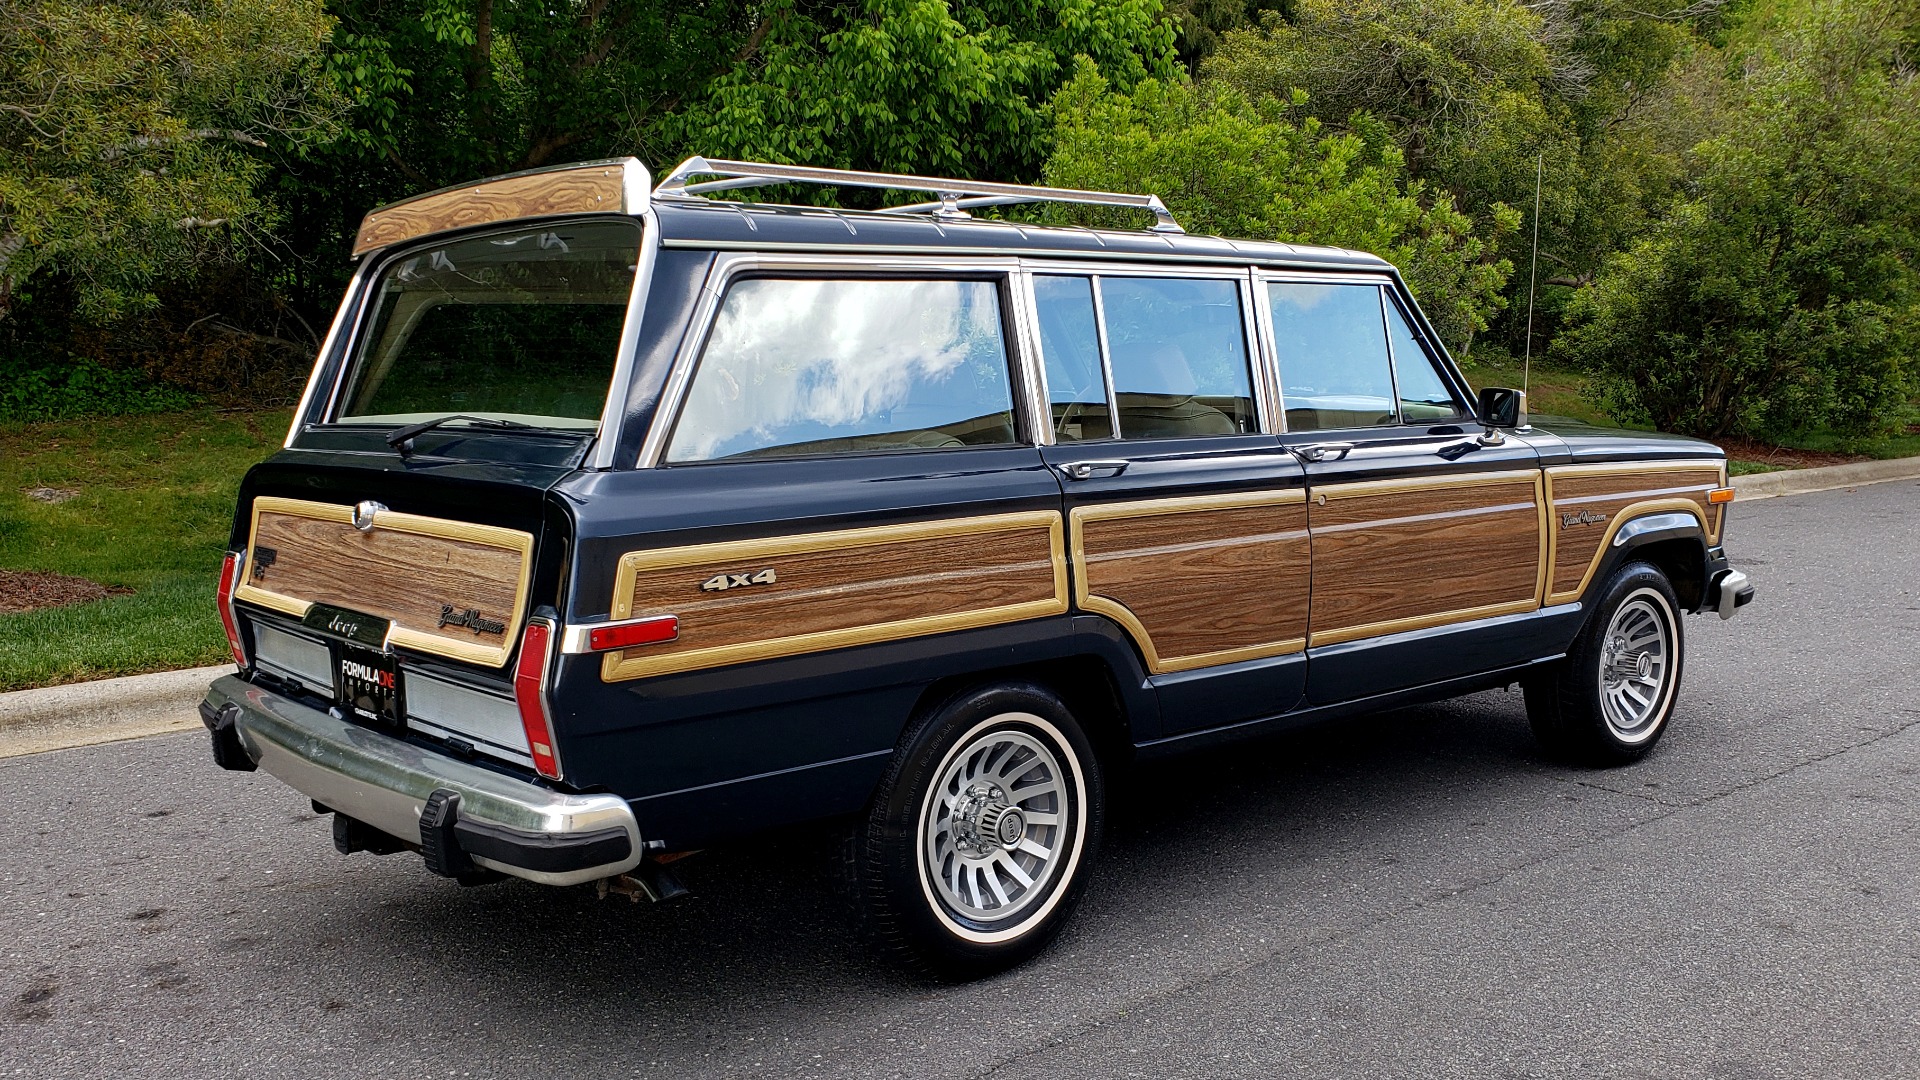 Used 1989 Jeep GRAND WAGONEER 4x4 / 5.9L V8 / 3-SPEED AUTO / PIONEER STEREO for sale Sold at Formula Imports in Charlotte NC 28227 6